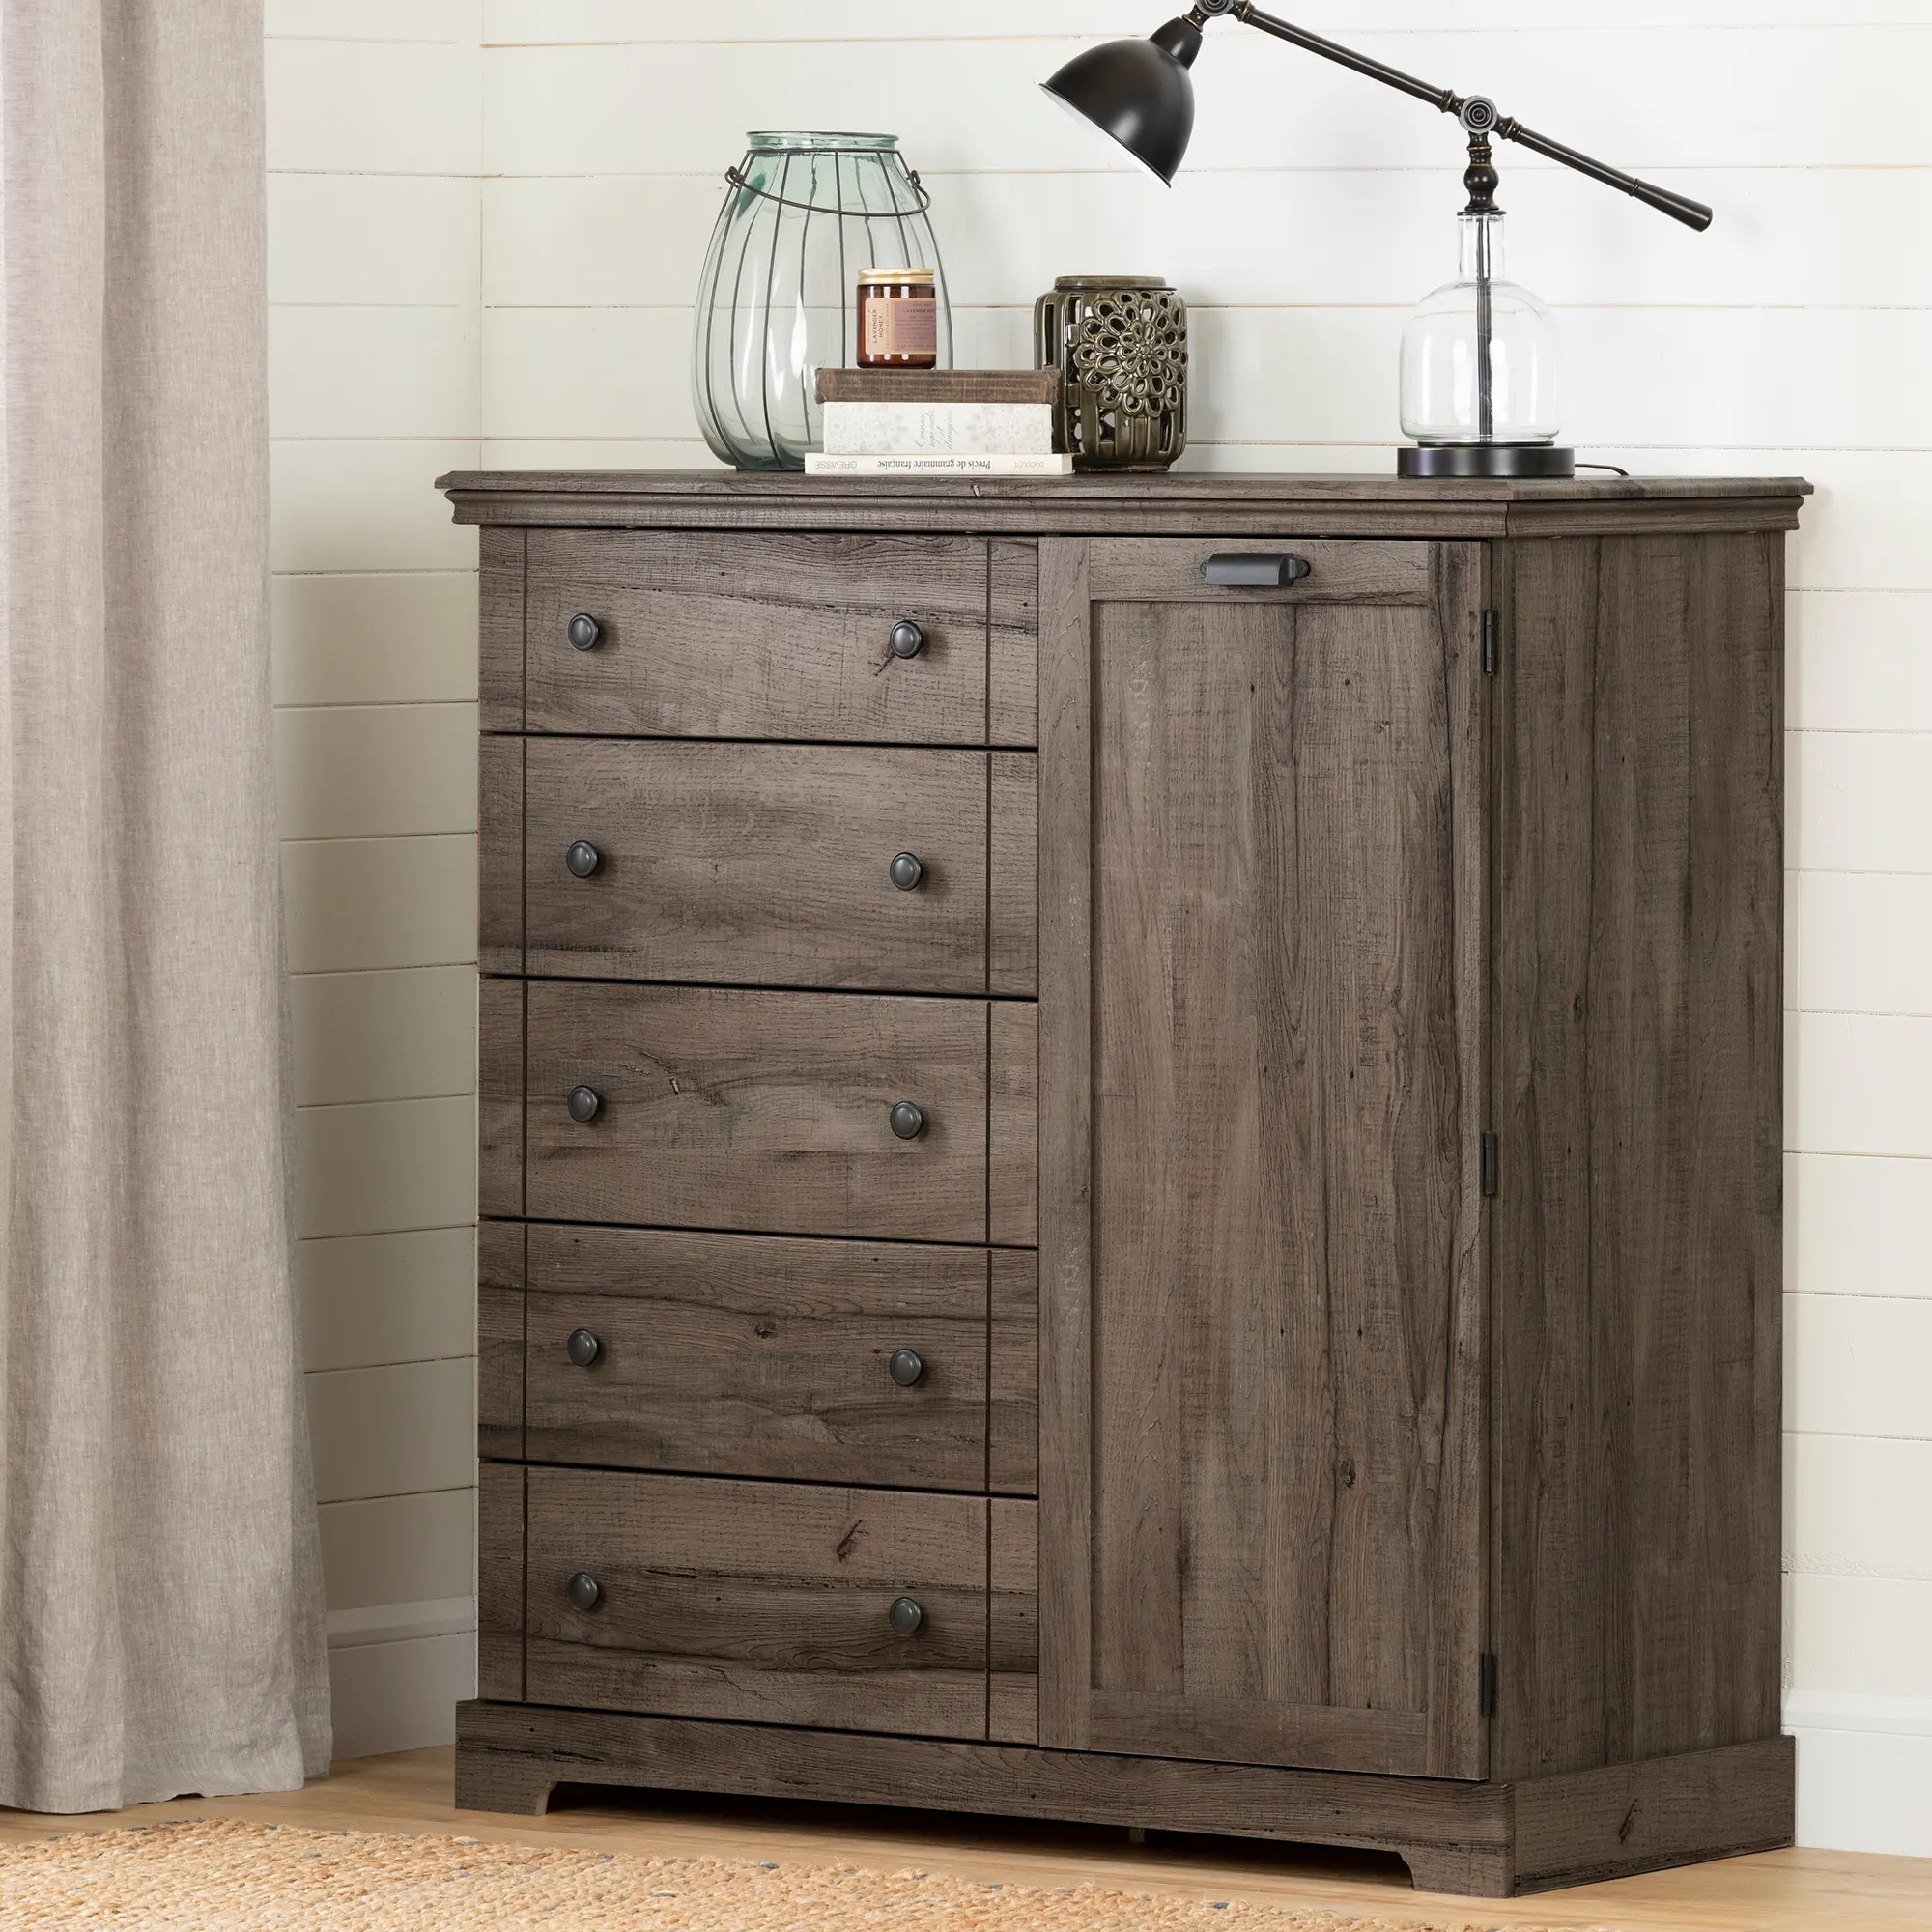 12763 Lilak Cottage Fall Oak Door Chest with Drawers - S sku 12763